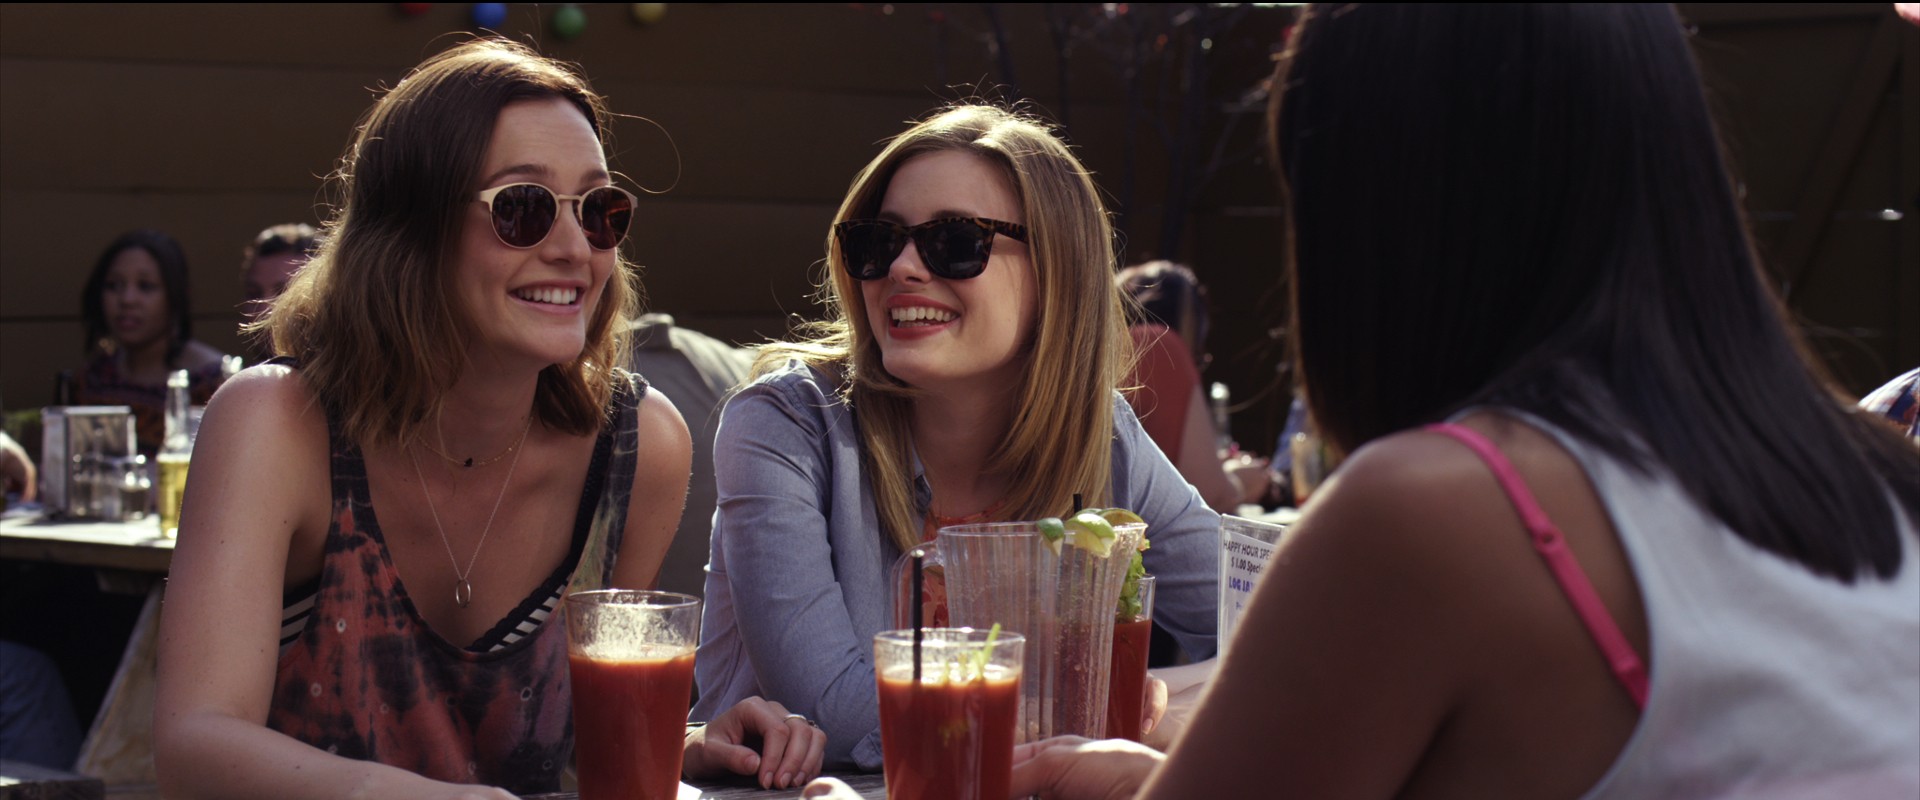 Leighton Meester stars as Sasha and Gillian Jacobs stars as Paige in Magnolia Pictures' Life Partners (2014)